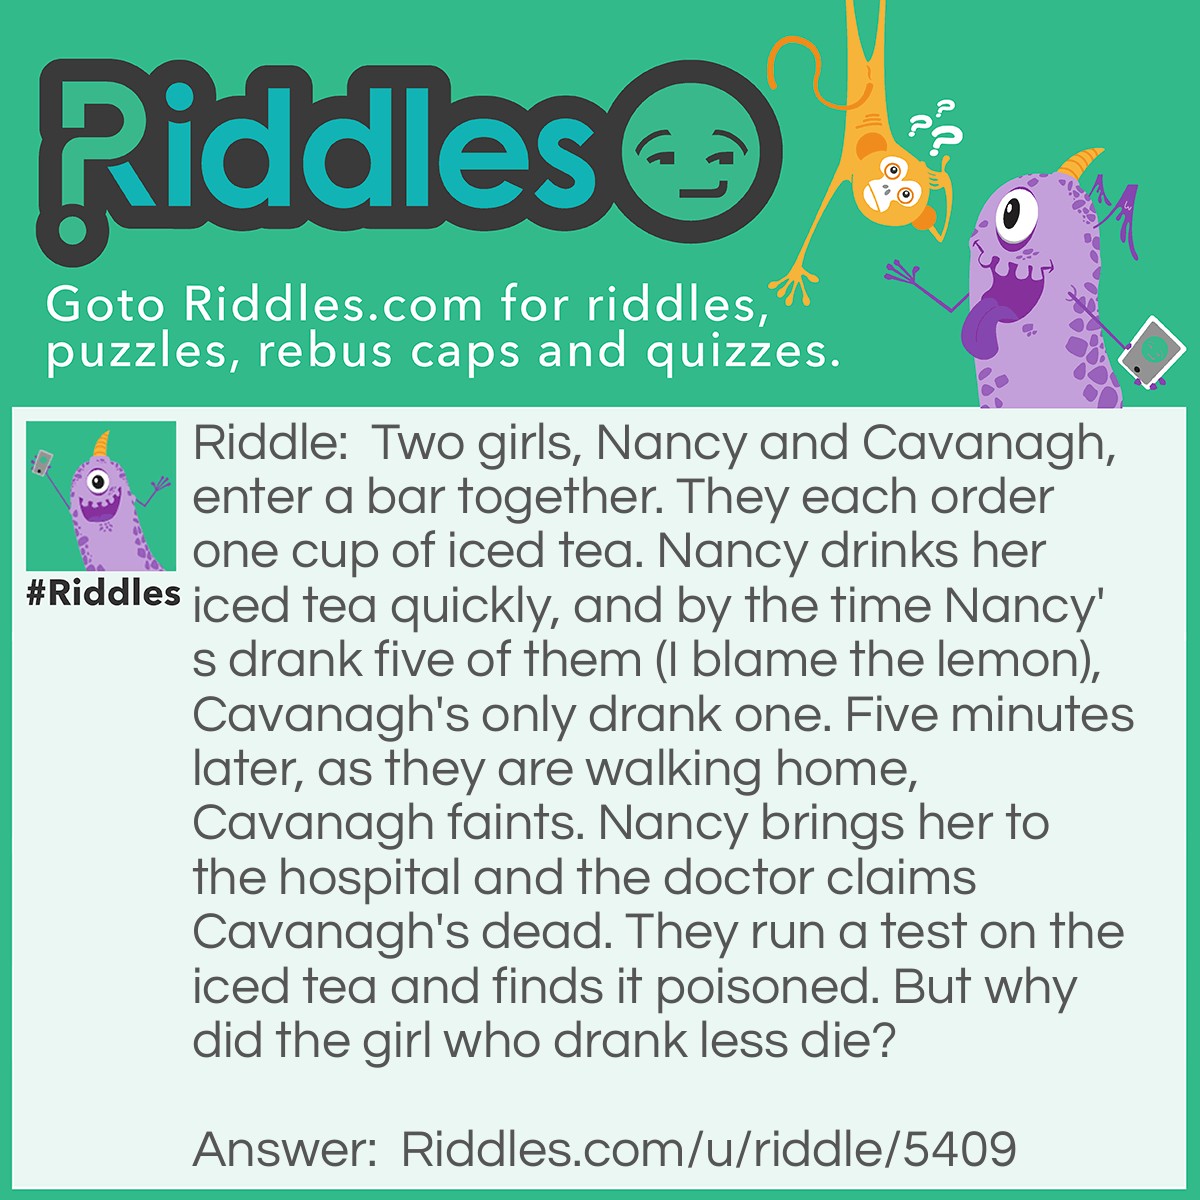 Riddle: Two girls, Nancy and Cavanagh, enter a bar together. They each order one cup of iced tea. Nancy drinks her iced tea quickly, and by the time Nancy's drank five of them (I blame the lemon), Cavanagh's only drank one. Five minutes later, as they are walking home, Cavanagh faints. Nancy brings her to the hospital and the doctor claims Cavanagh's dead. They run a test on the iced tea and finds it poisoned. But why did the girl who drank less die? Answer: The poison was in the ice. Since Cavanagh drank slowly, the ice had melted and she had drunk most of the poison.